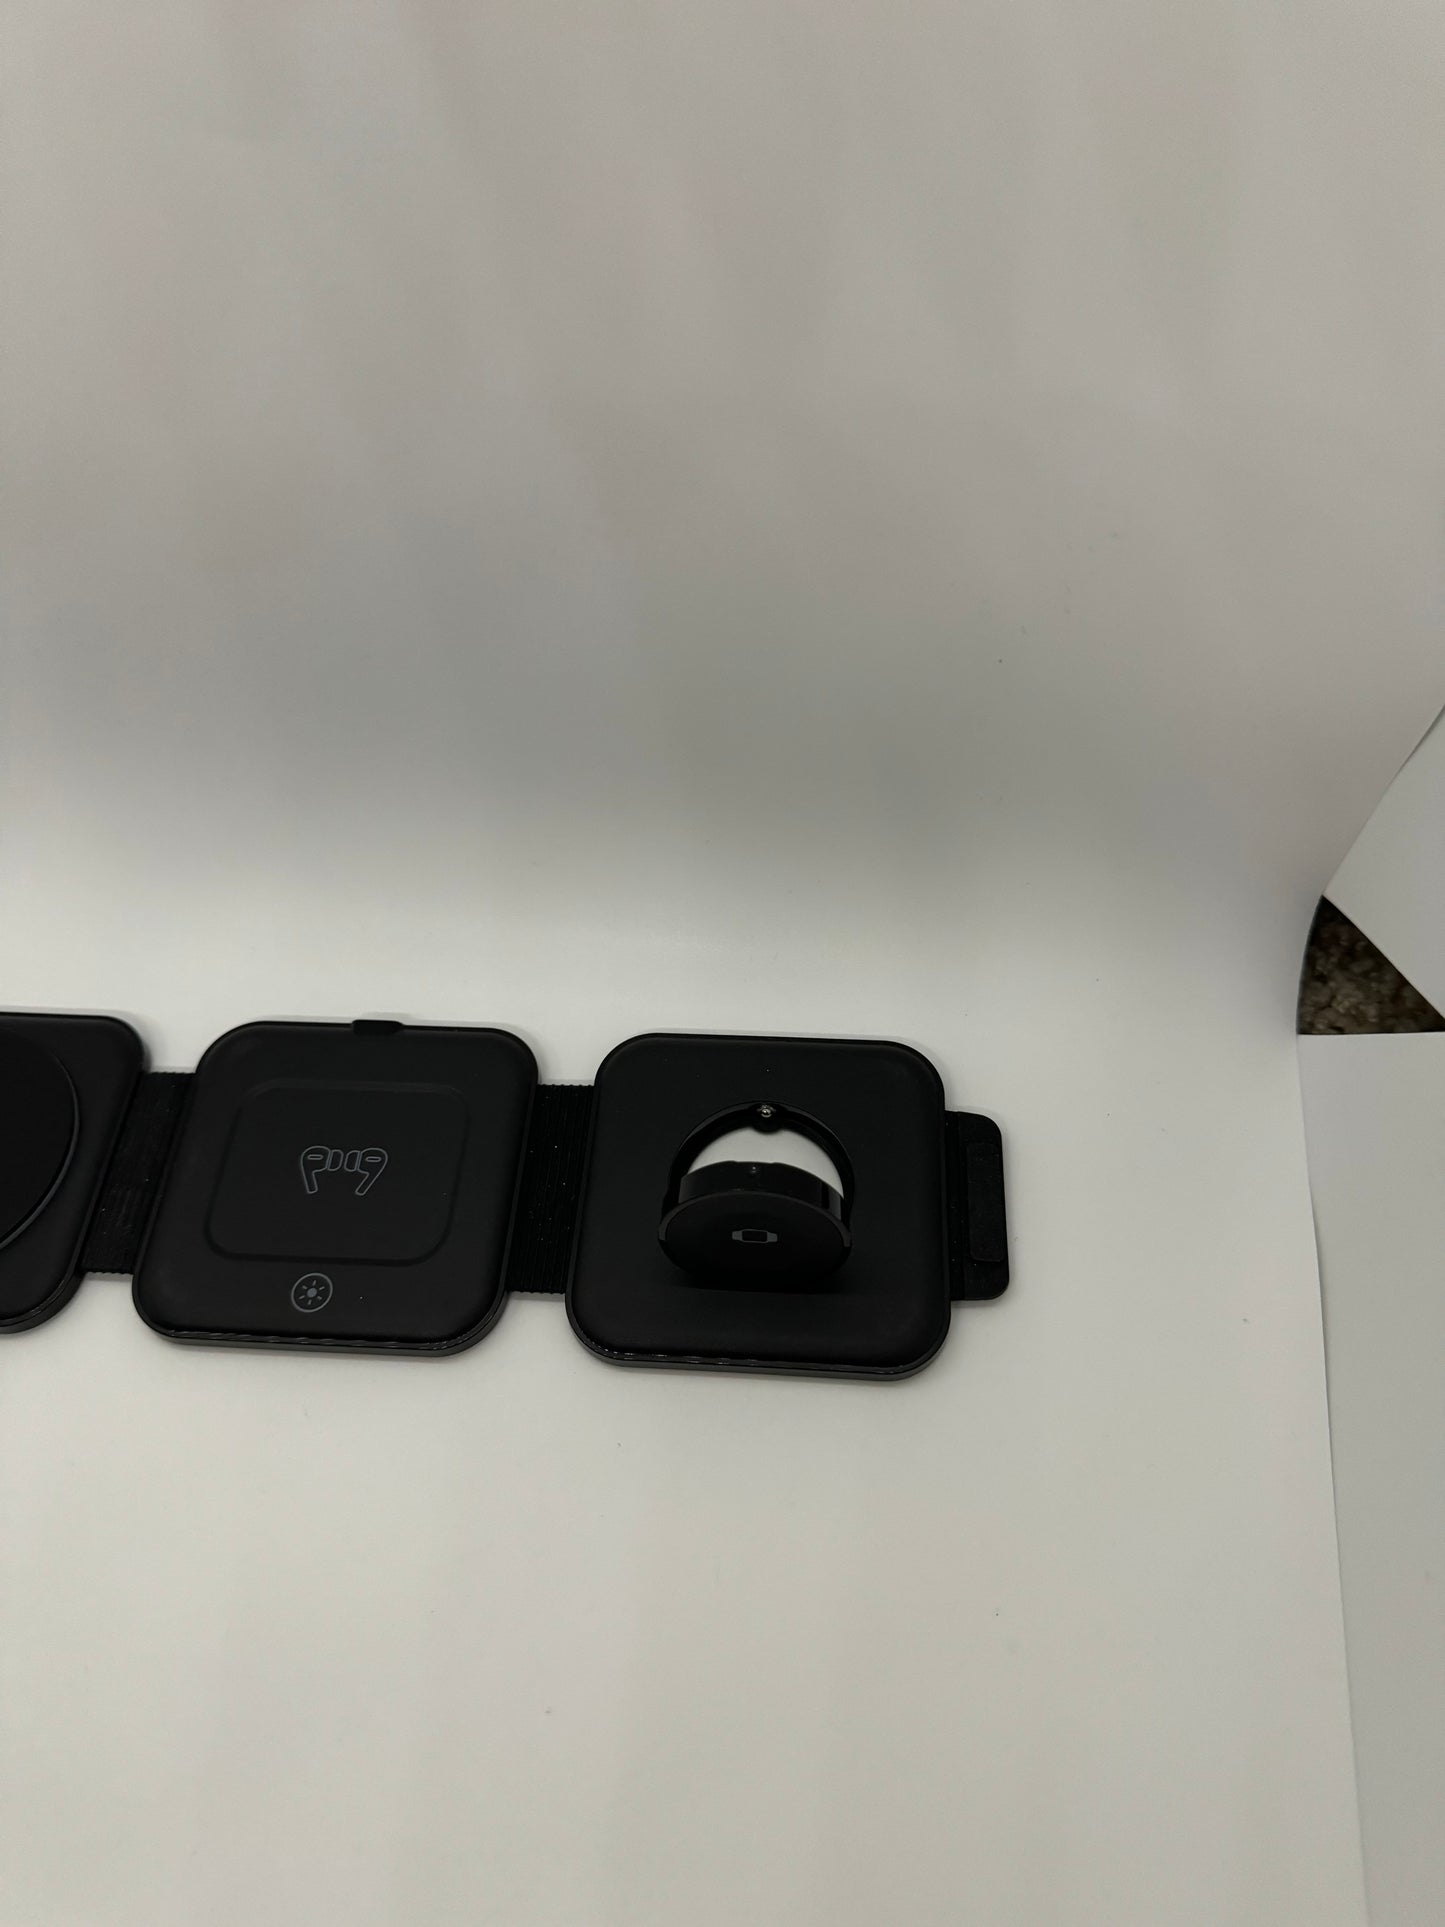 3 in 1 folding charging mat for Apple and other wireless devices. Includes wireless and MagSafe compatibility, place for wireless earbuds, and place for Apple watch. All in a small package that easily fits into a pocket or purse.